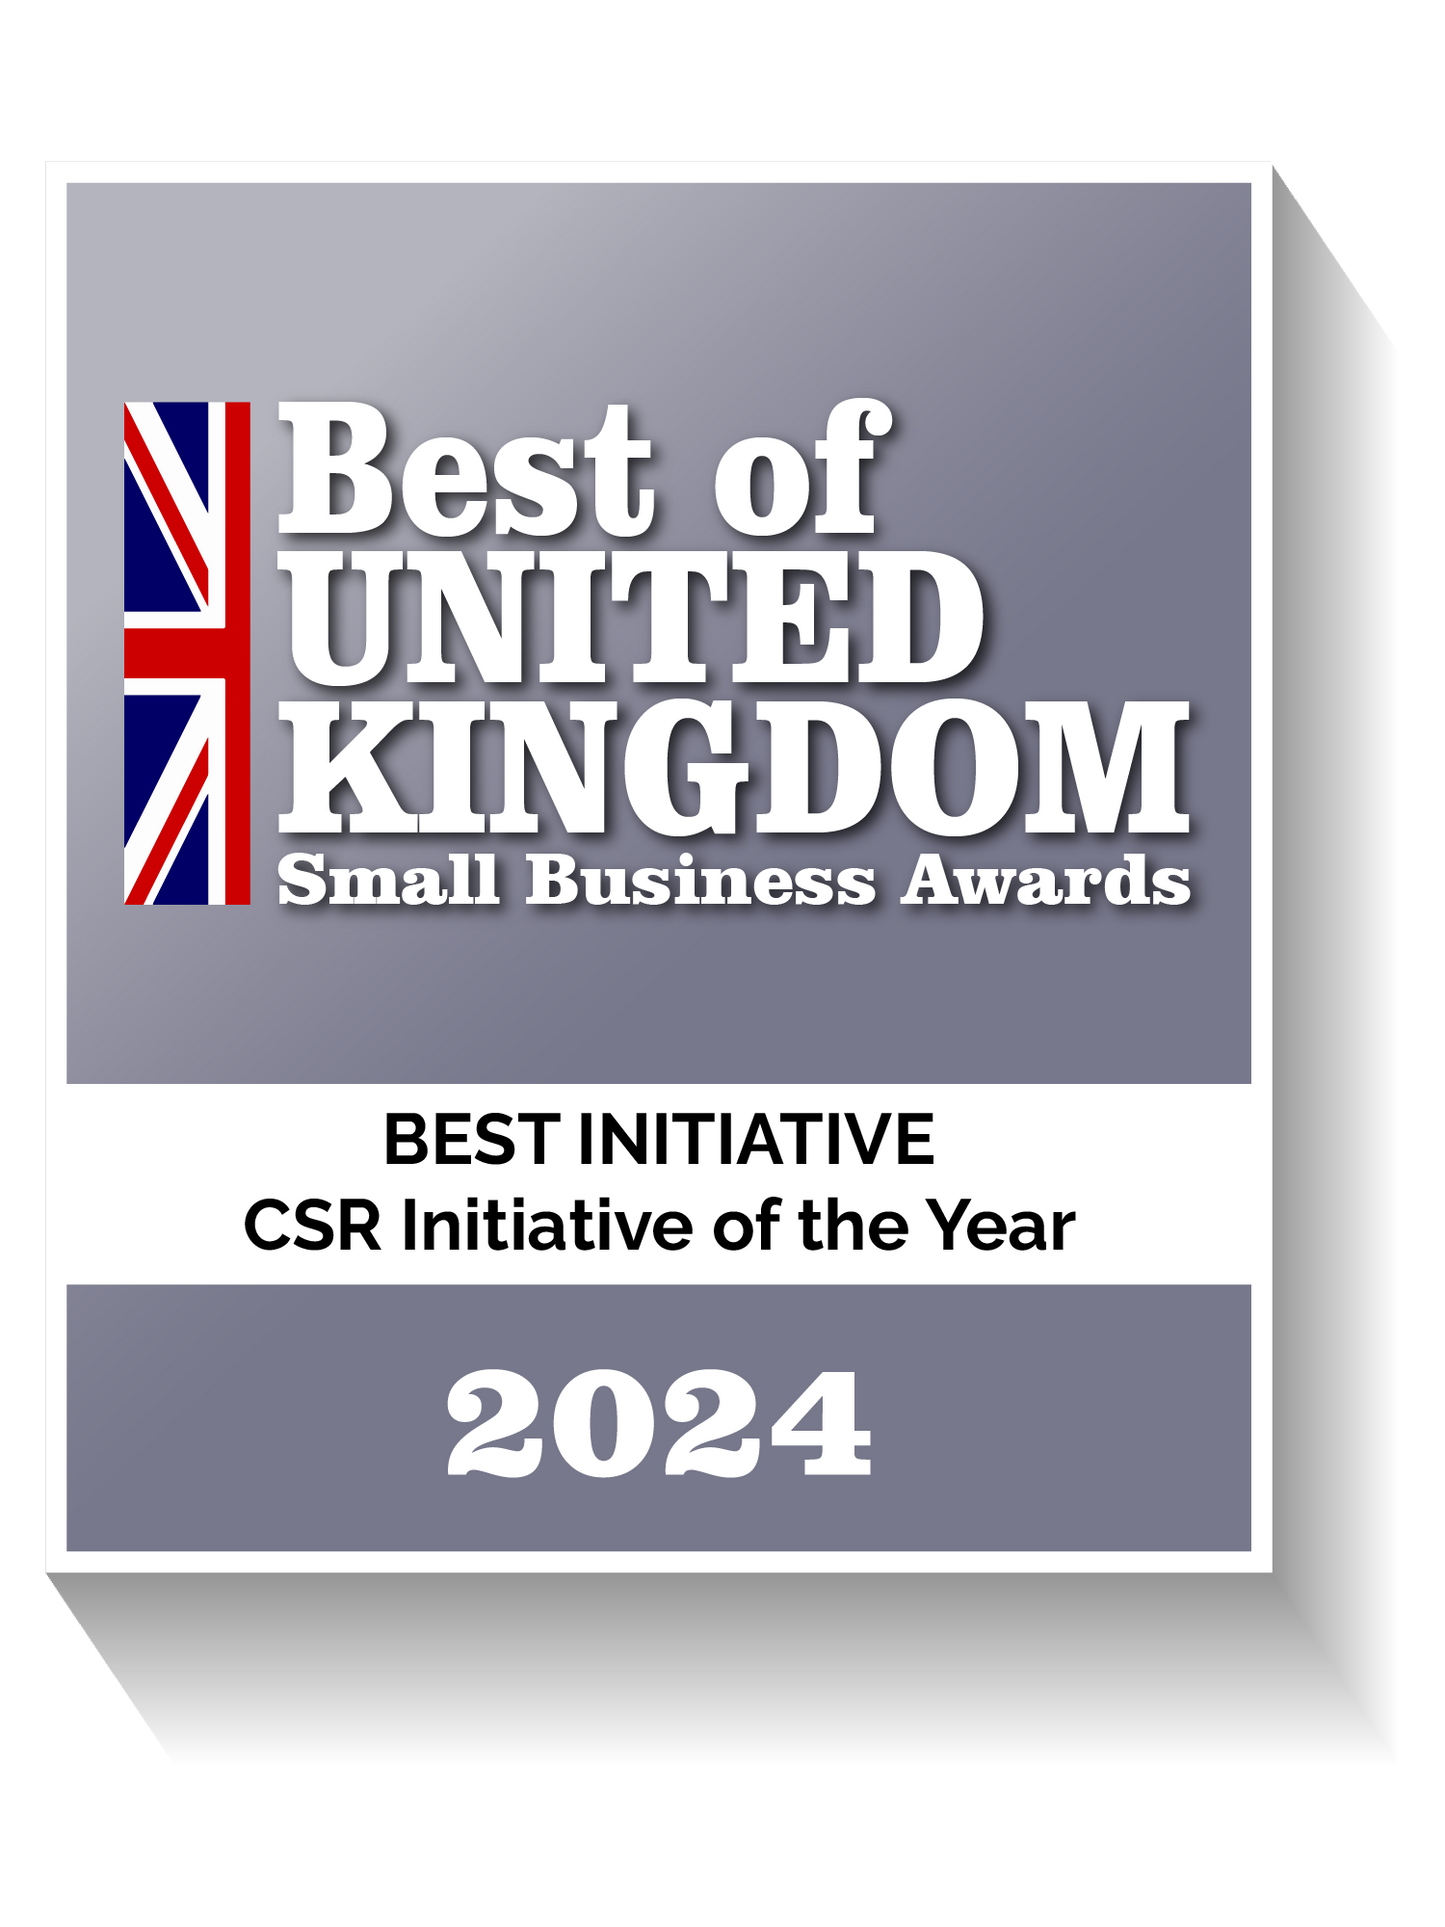 CSR Initiative of the Year